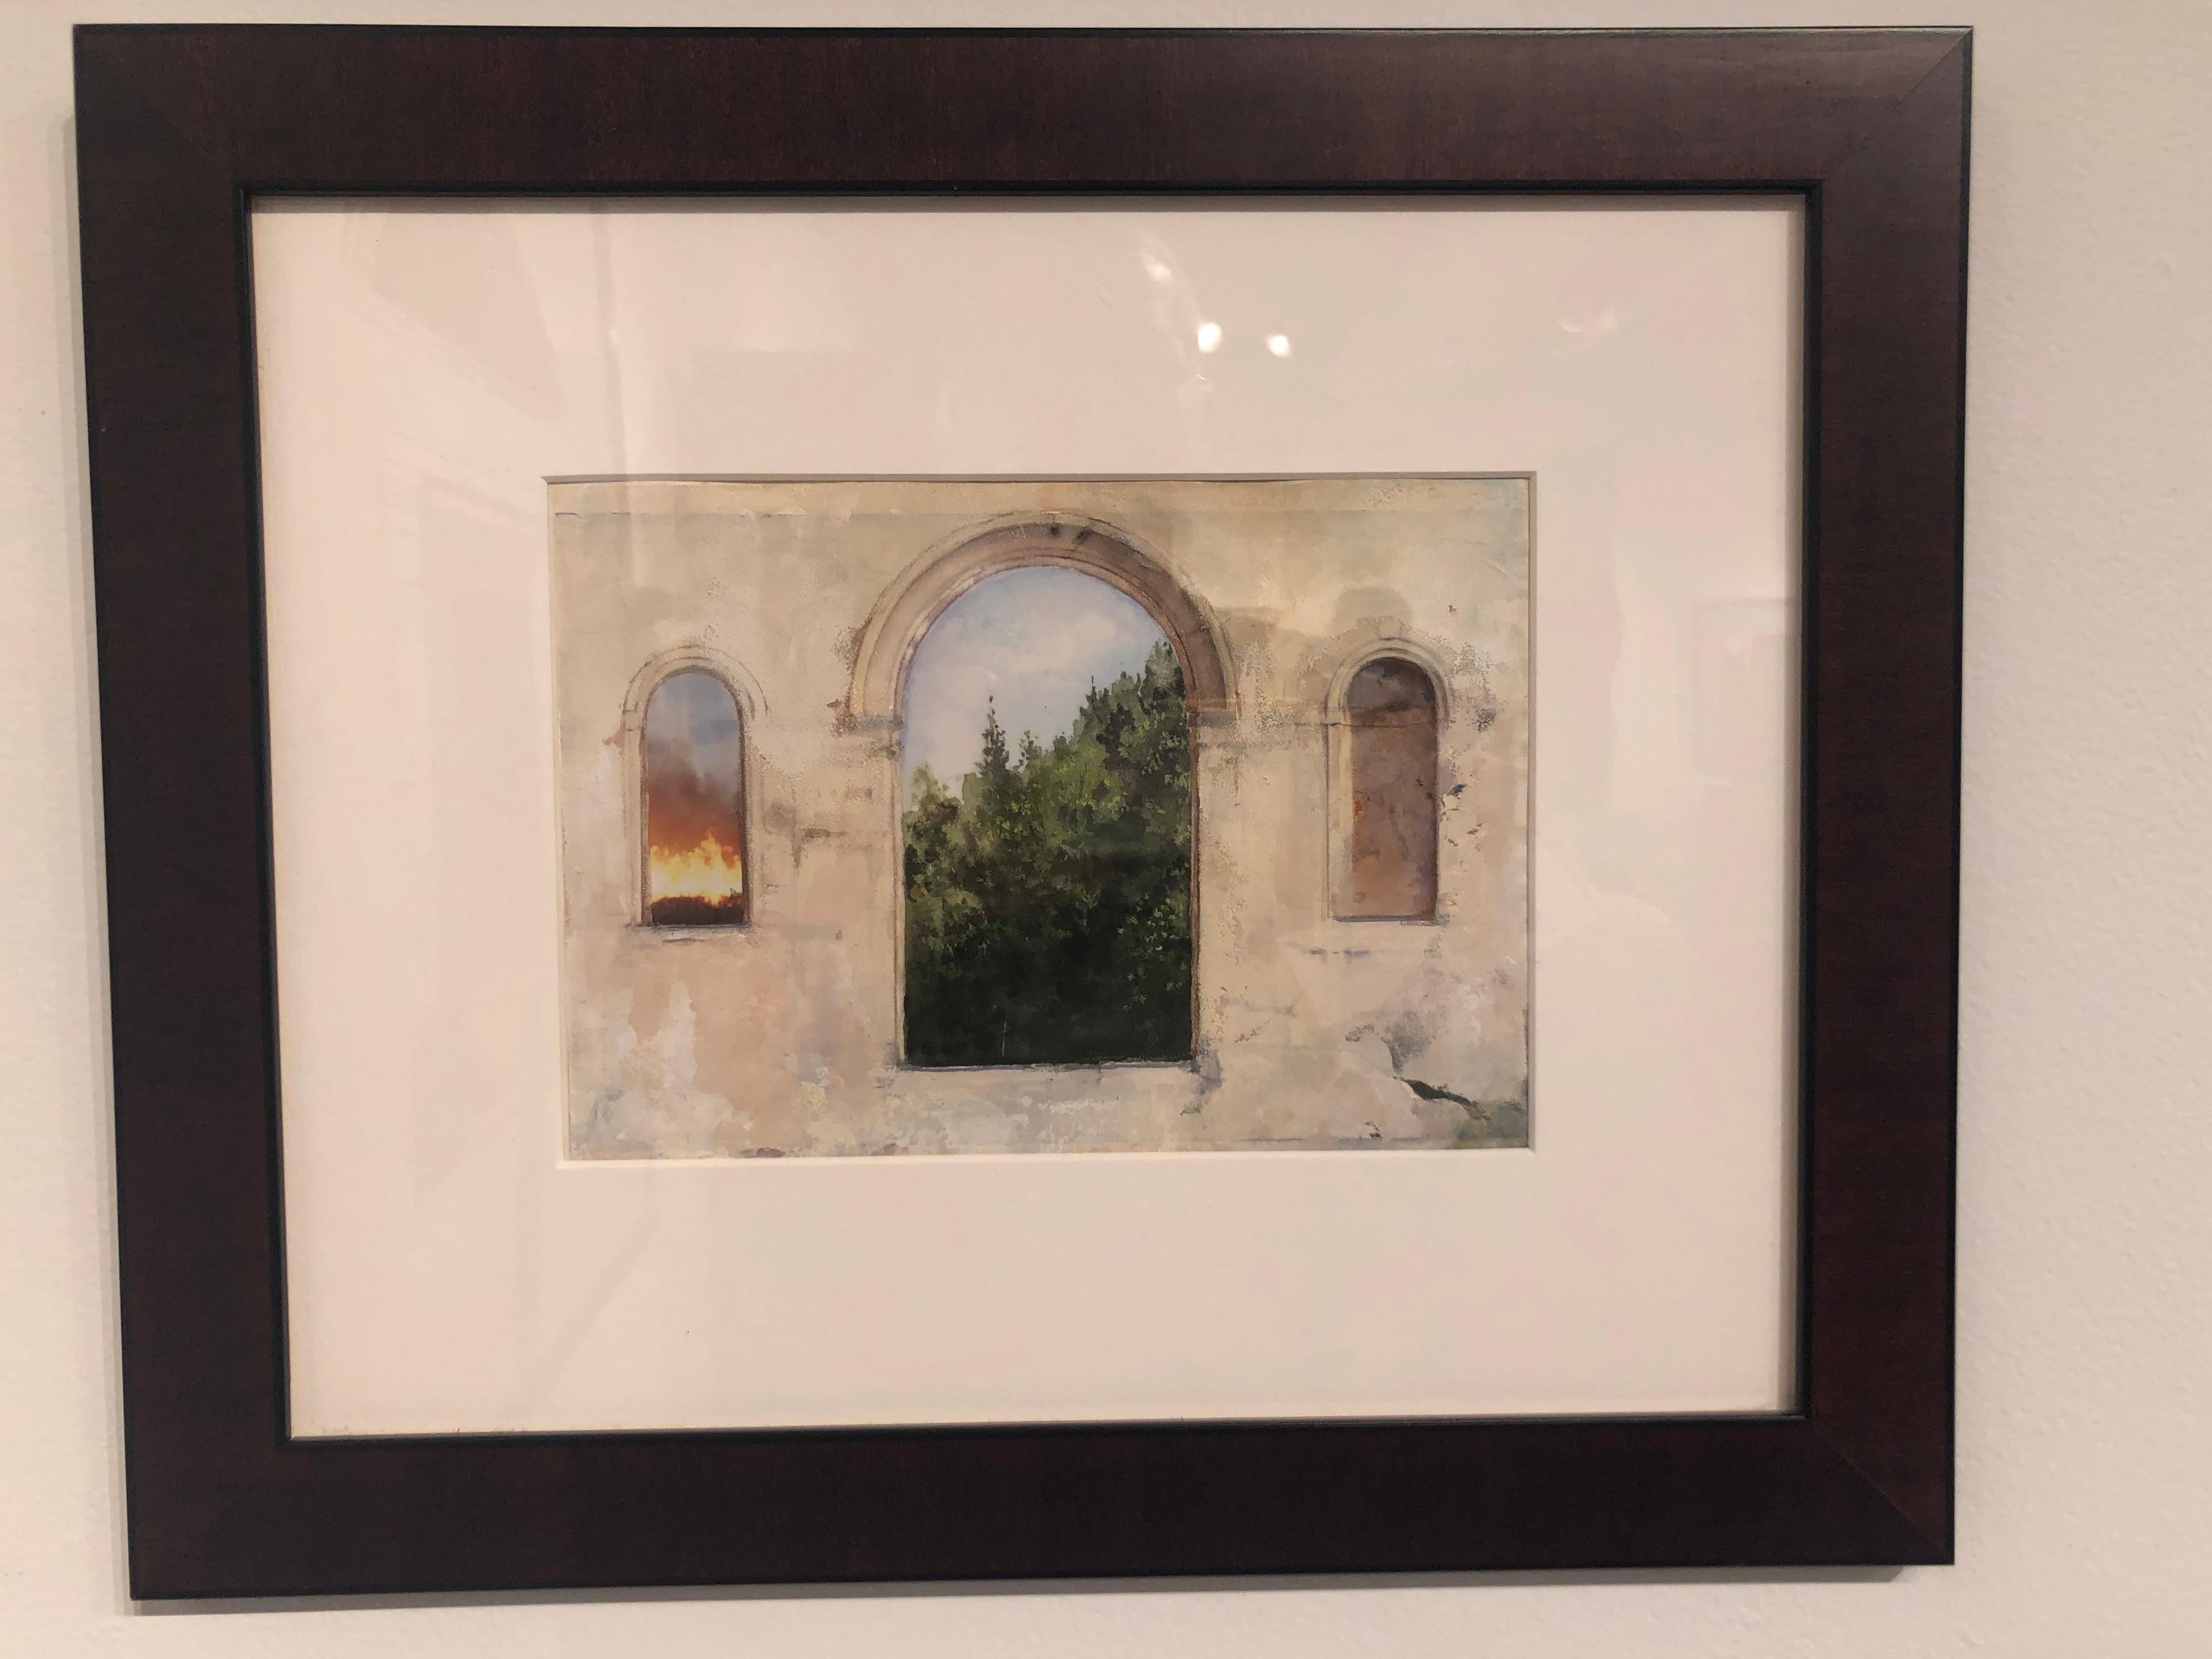 Arched Inferno - Architectural Study with Landscape, Collaged and Painted - Painting by Carol Pylant